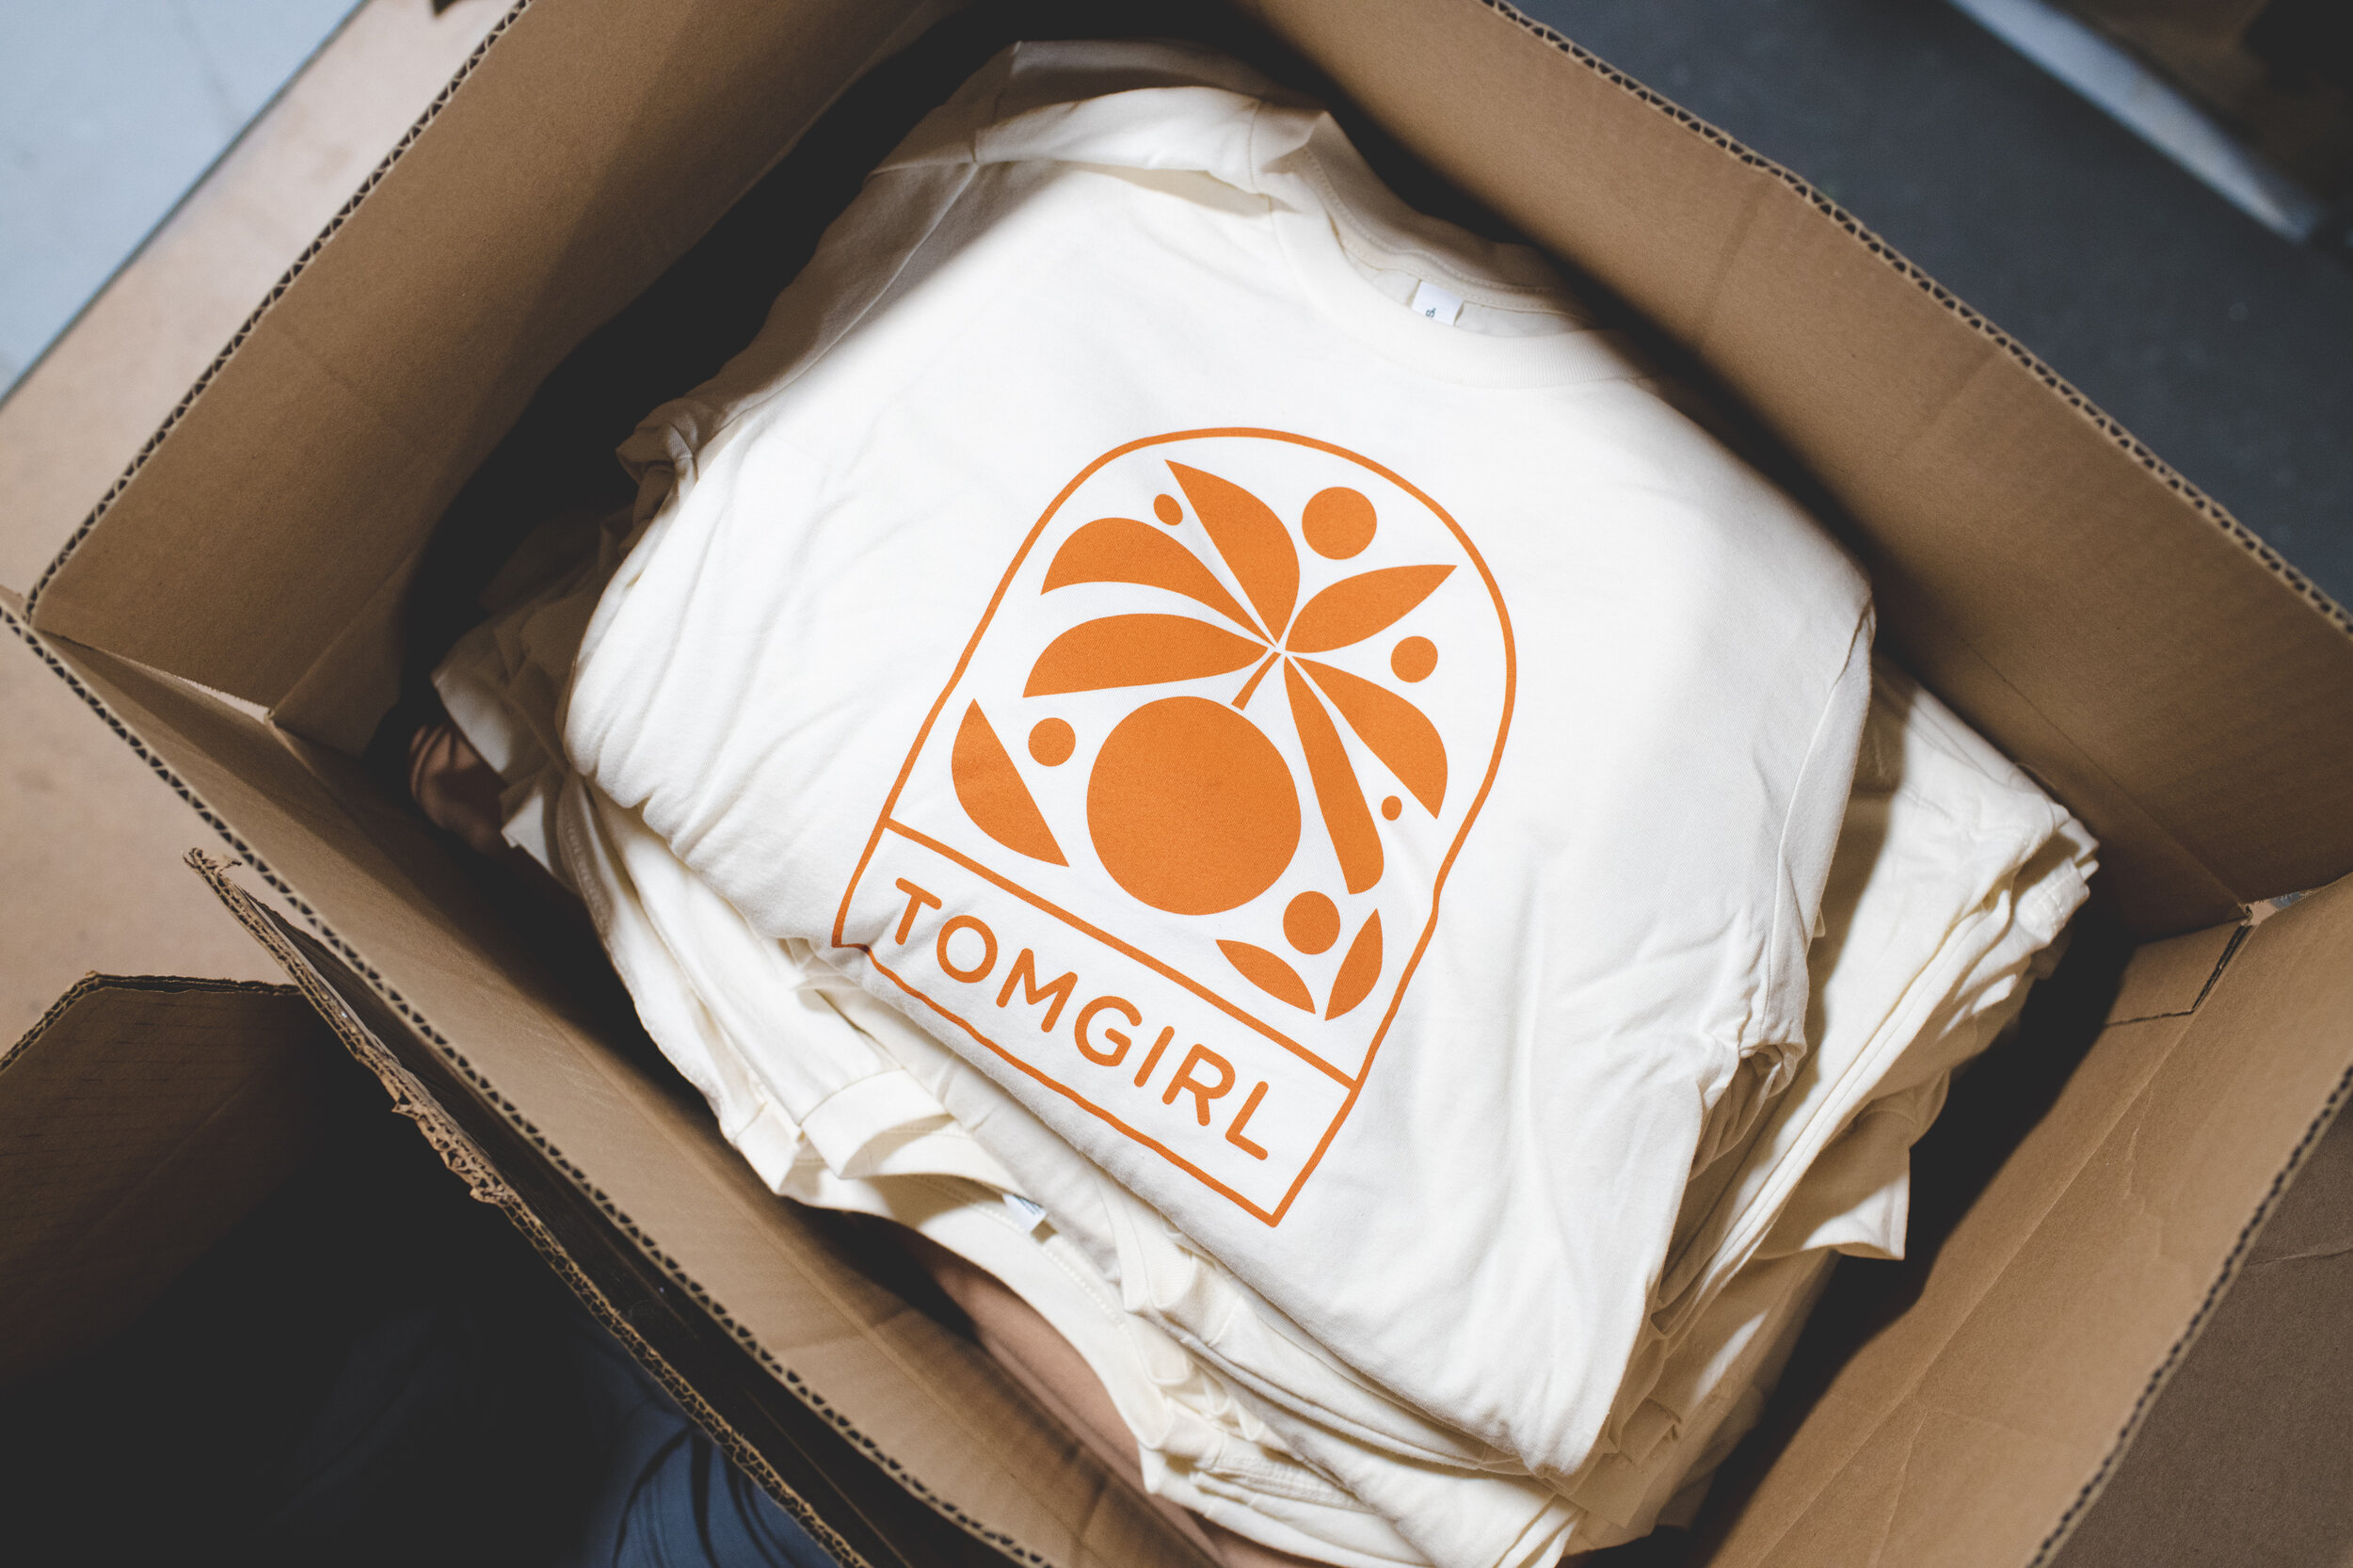 1 color shirts for Tomgirl